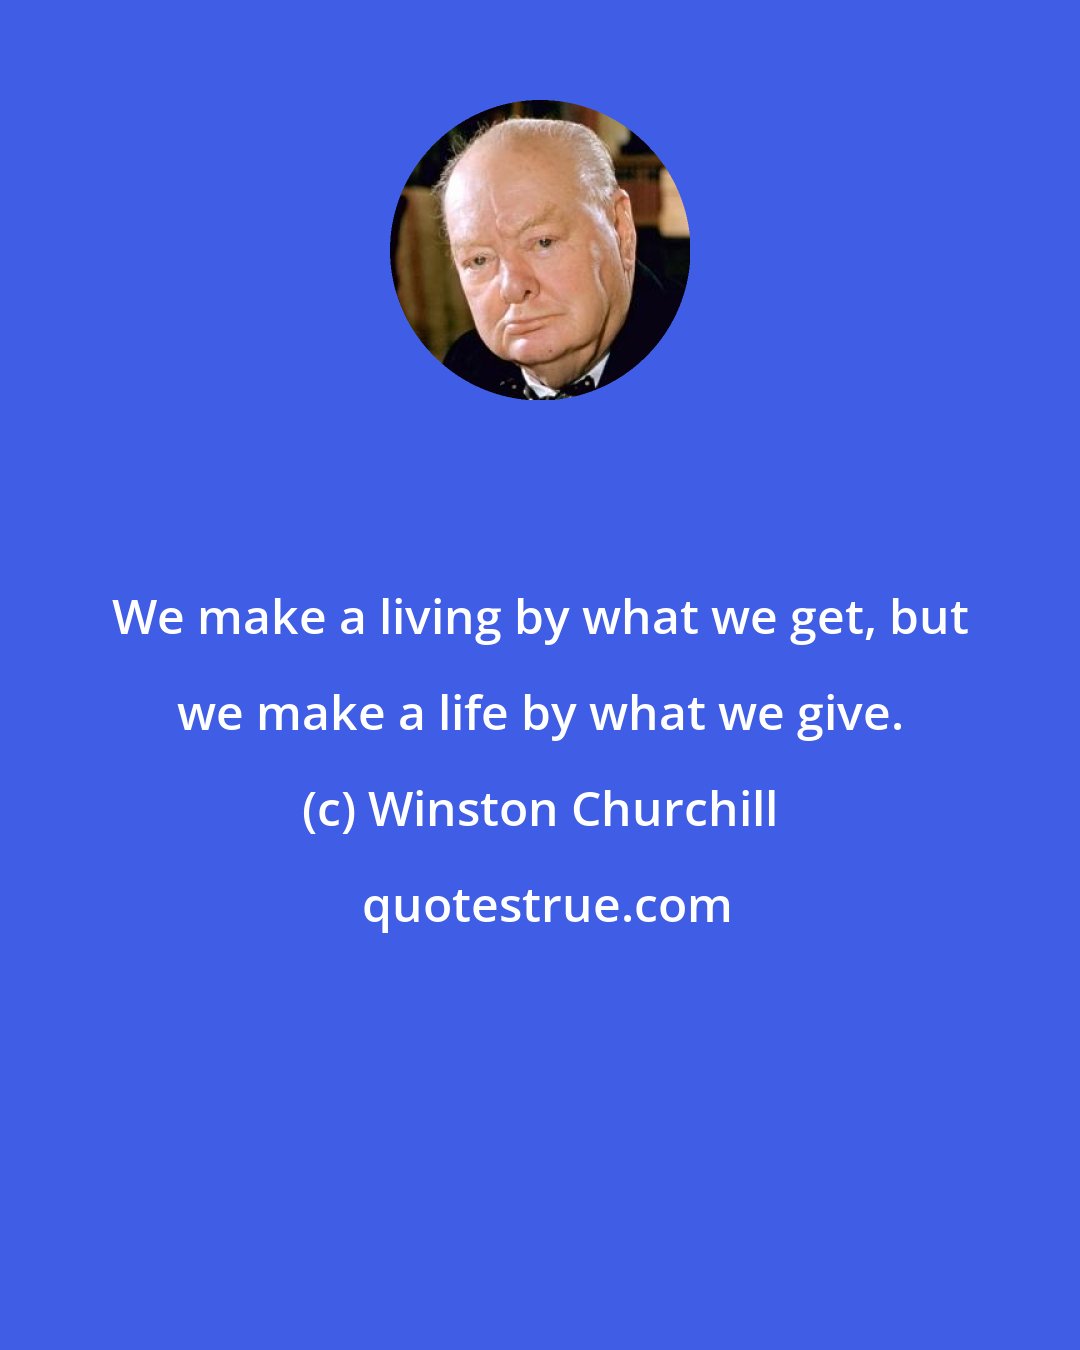 Winston Churchill: We make a living by what we get, but we make a life by what we give.